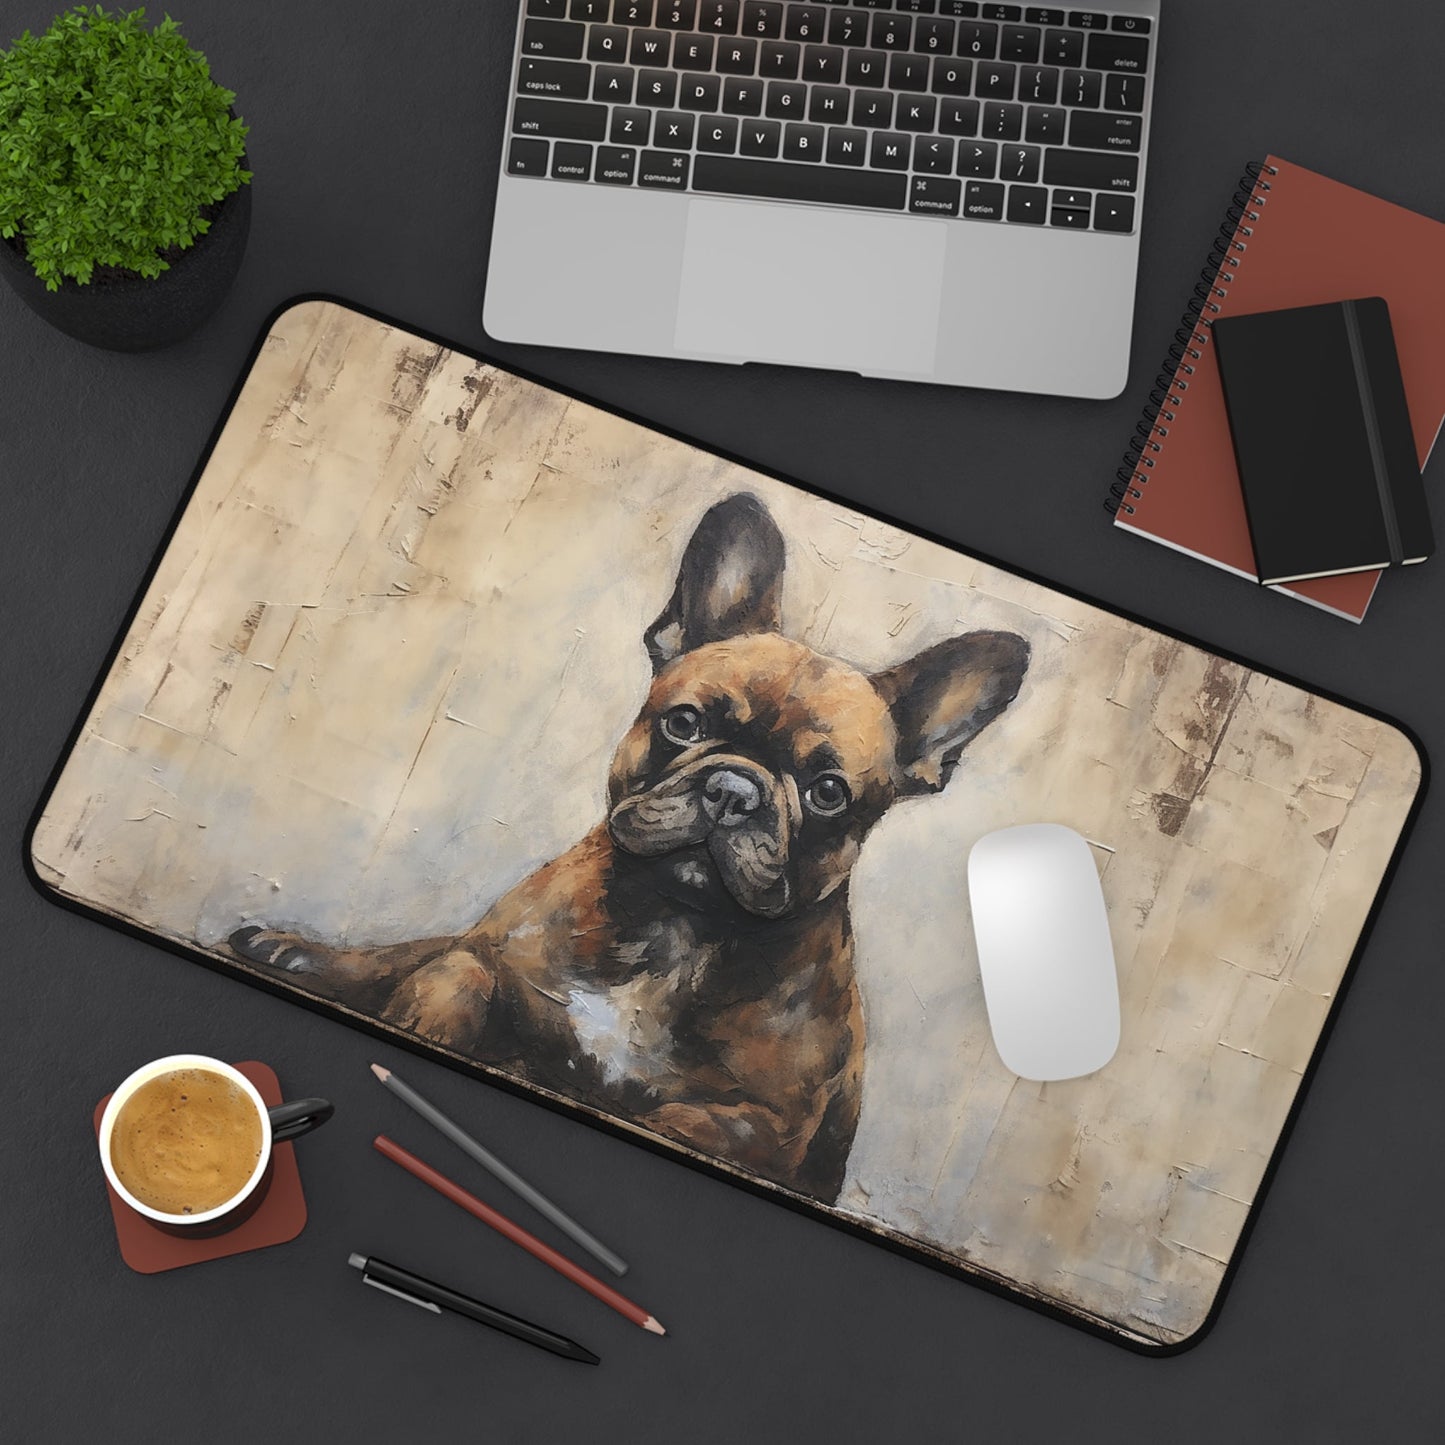 French Bulldog Art Large Mouse Pad, Part of Dog Collection Desk Mats, Gaming, Home Office - FlooredByArt